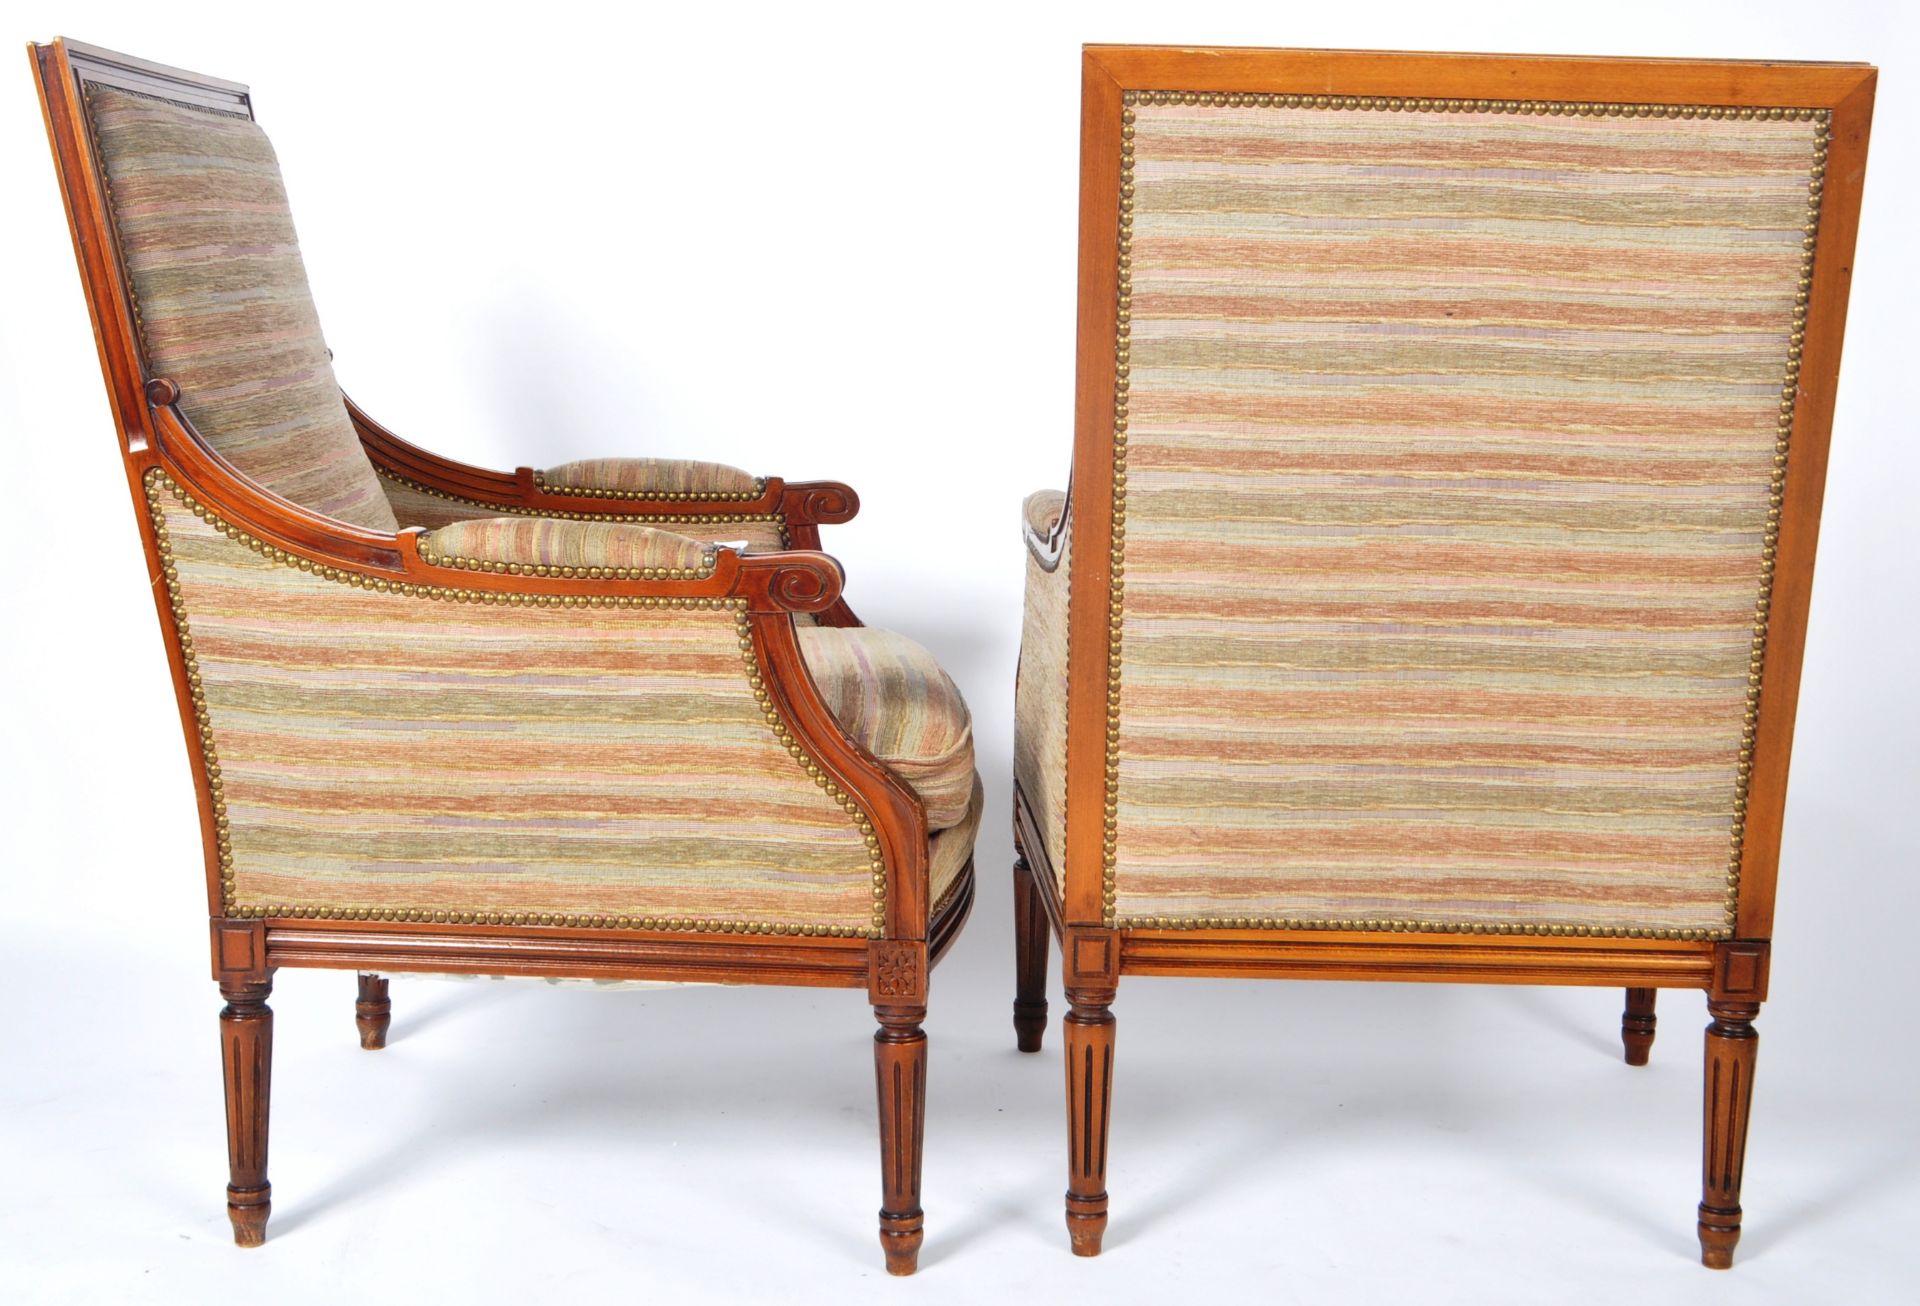 PAIR OF 19TH CENTURY MAHOGANY LIBRARY CHAIRS - Image 6 of 8